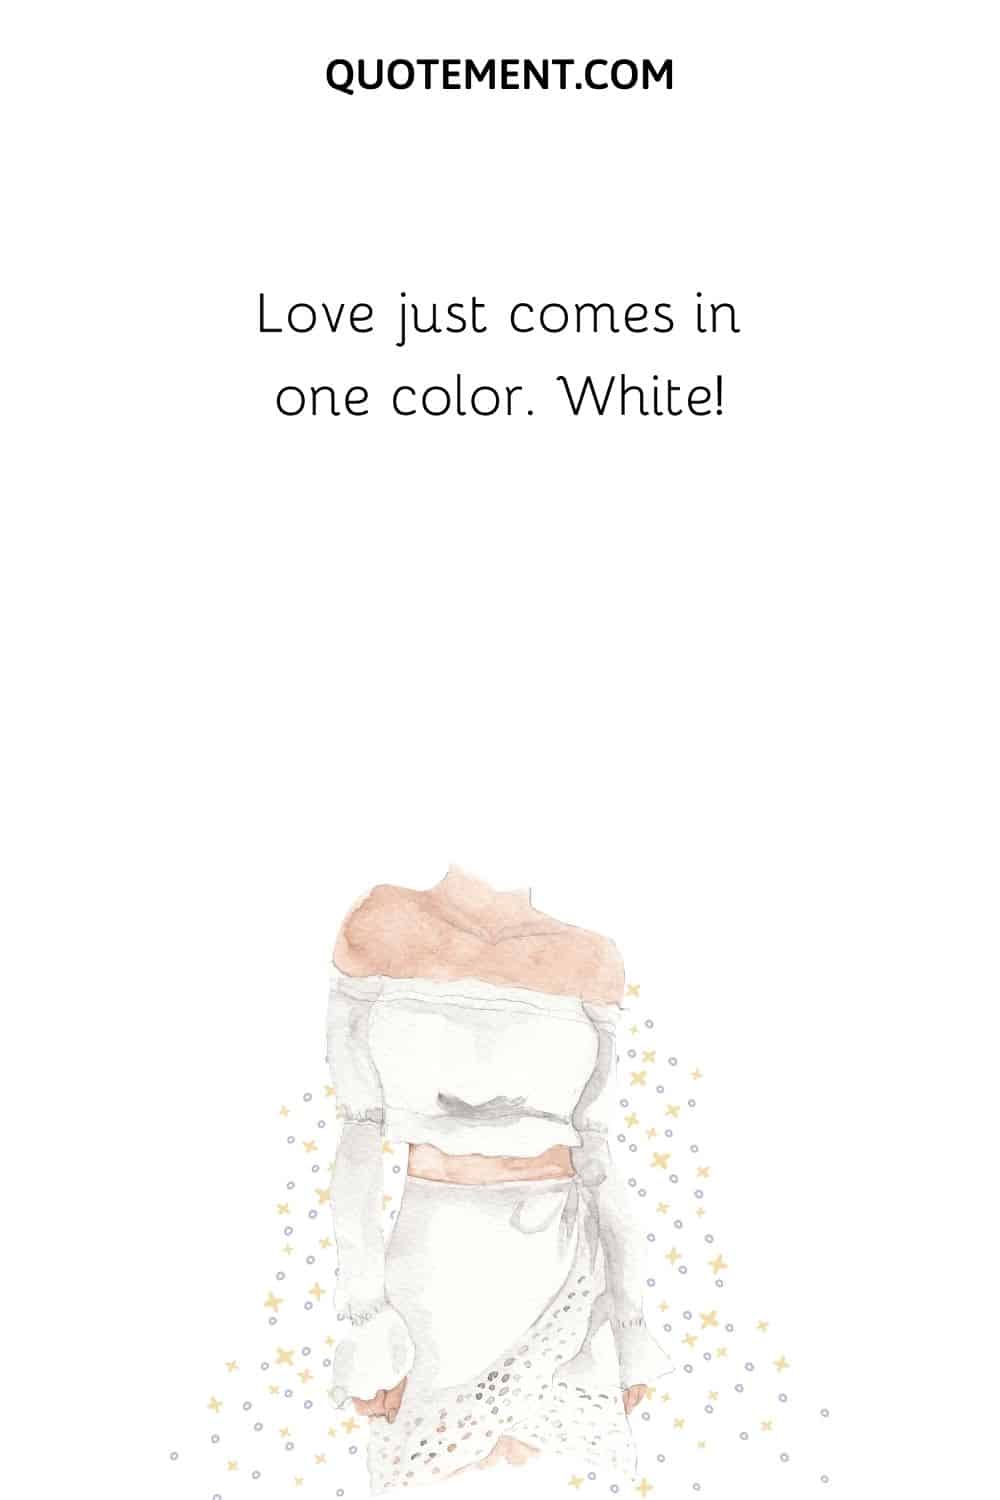 Love just comes in one color. White!